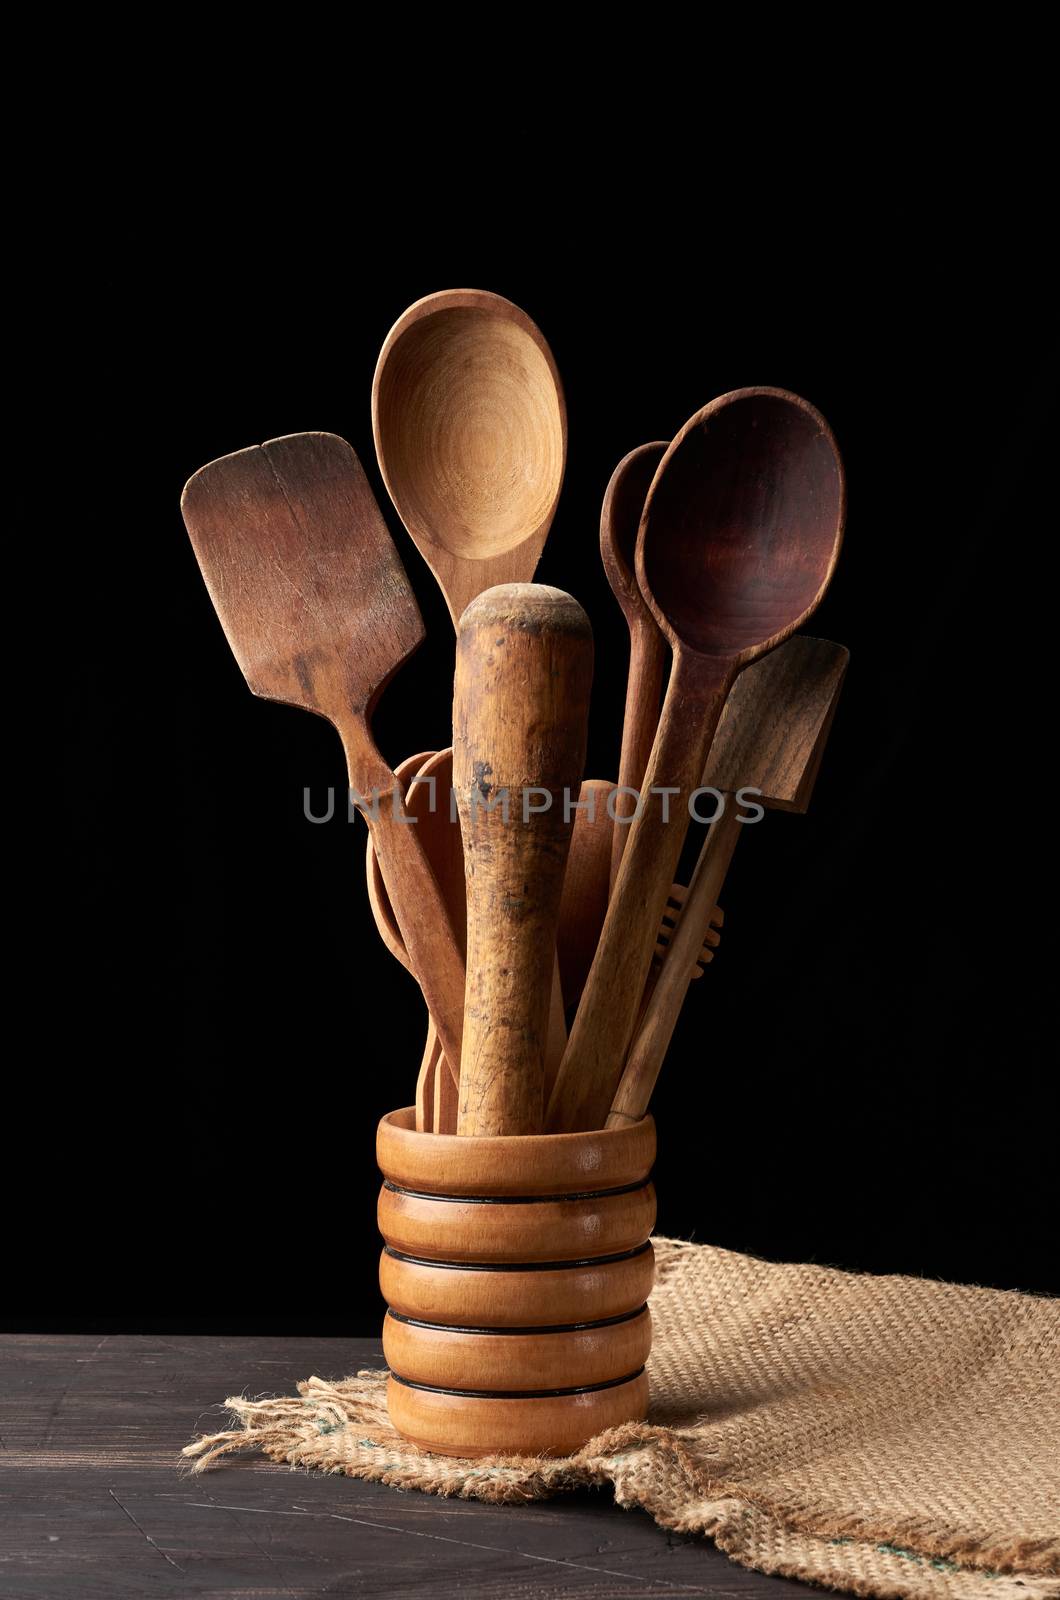 various spoons and kitchen wooden utensils in a bowl on the tabl by ndanko